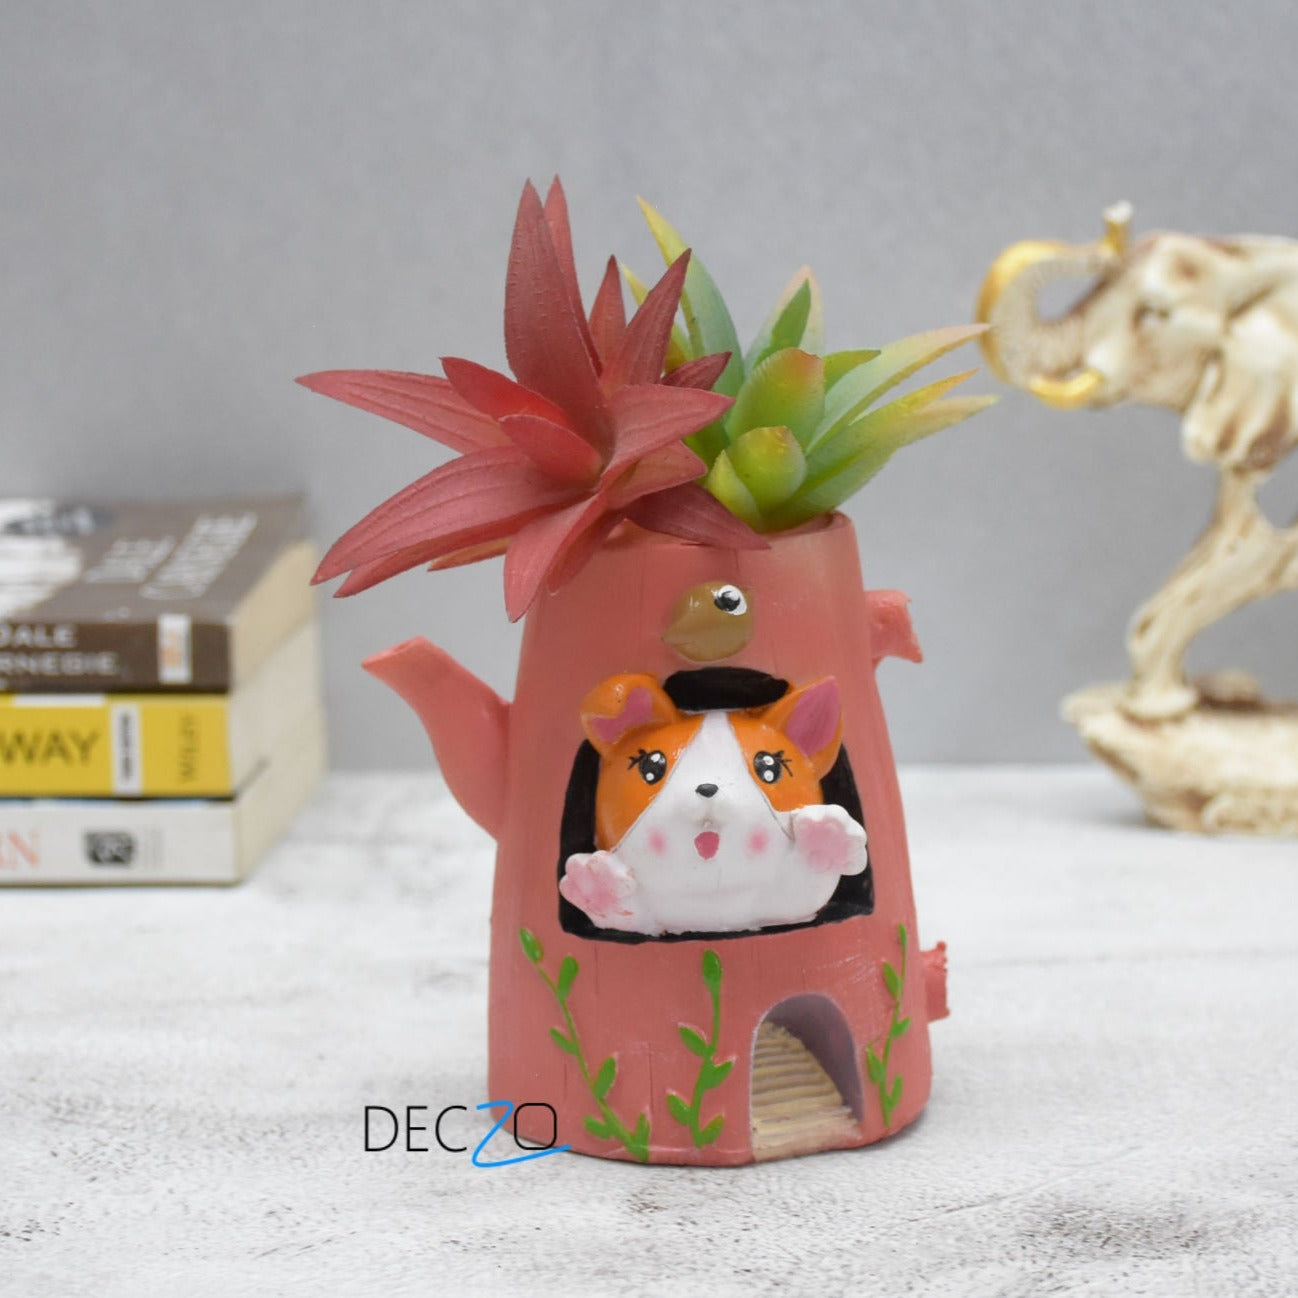 Cute Puppy In the Kettle Resin Succulent Pot - Deczo